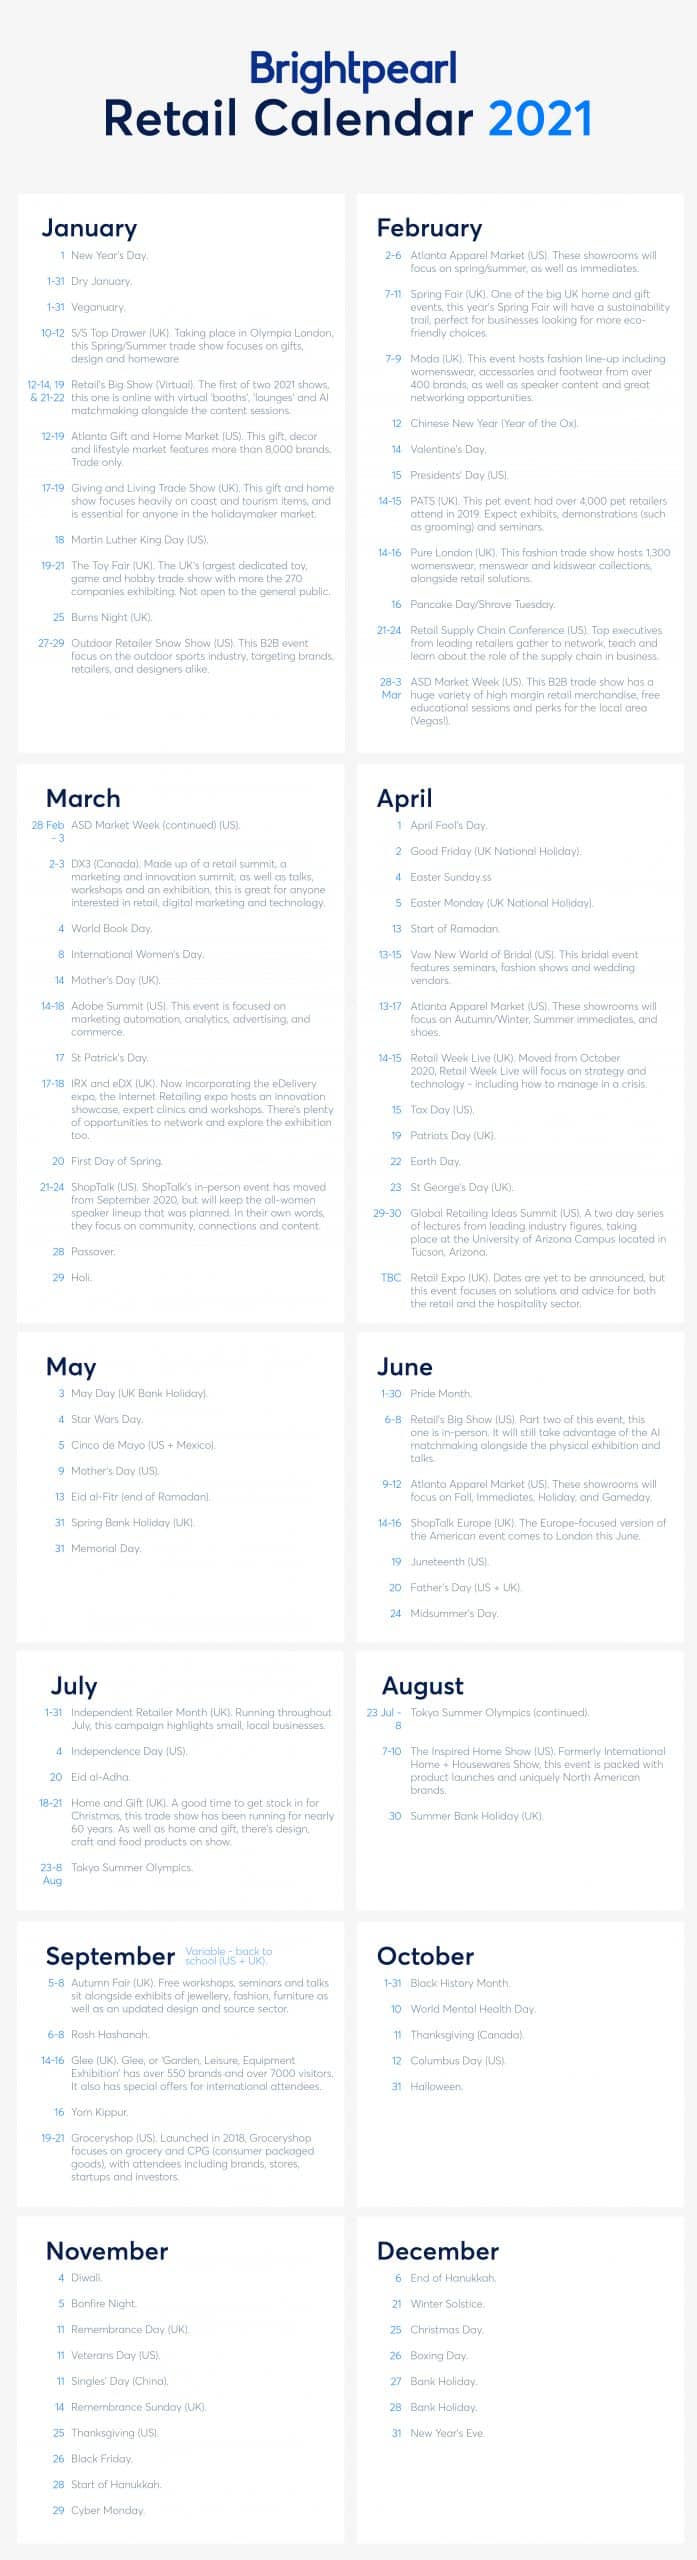 The 2020 And 2021 Retail Calendar Key Dates You Need To Know About As A Retail Business In 2020 And 2021 Brightpearl Blog